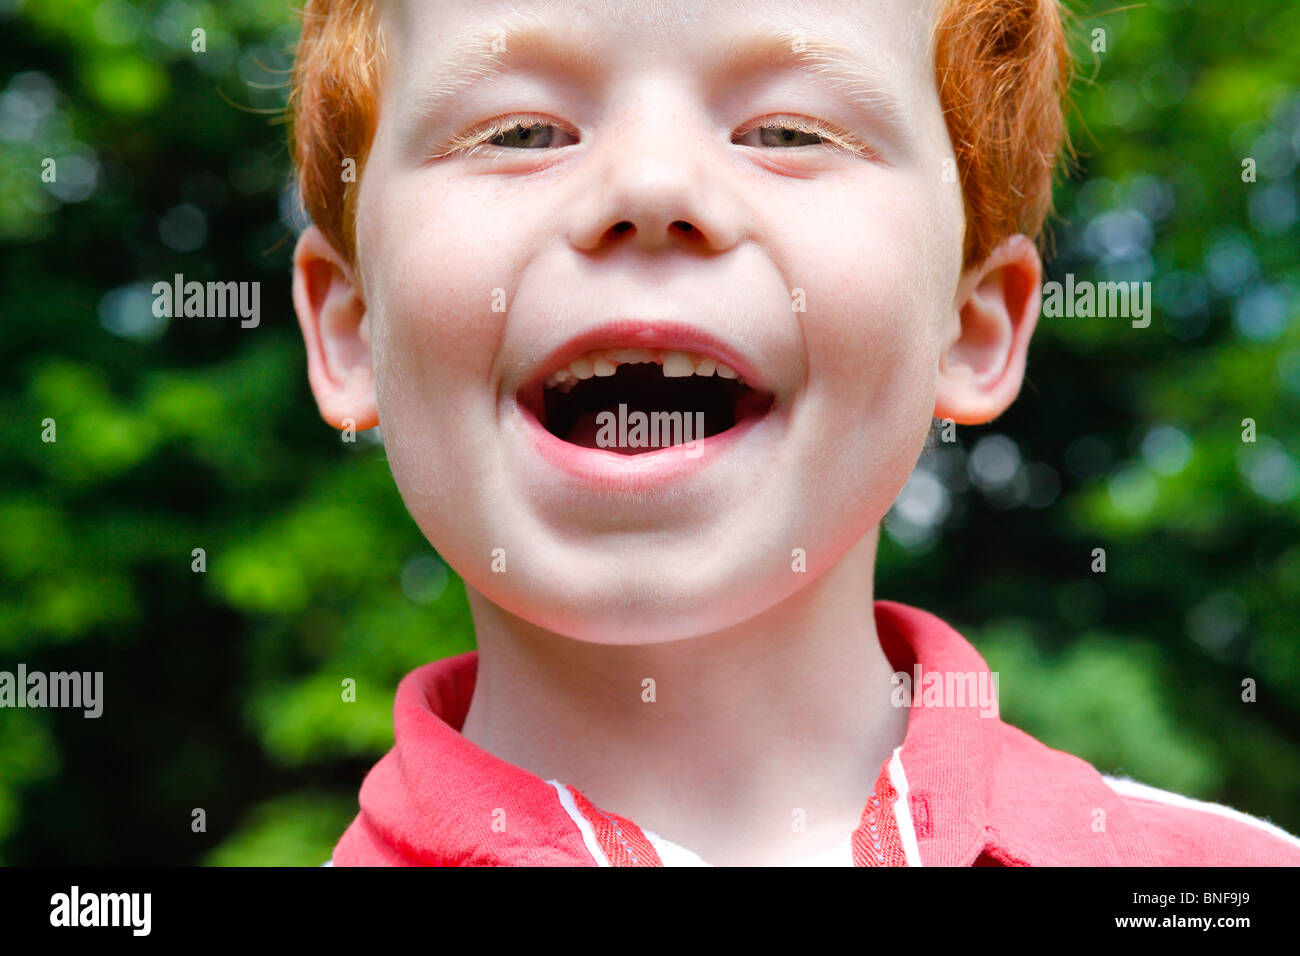 A six yeal old boy smiles showing his missing child tooth and his adult tooth growing through, in the garden. Stock Photo